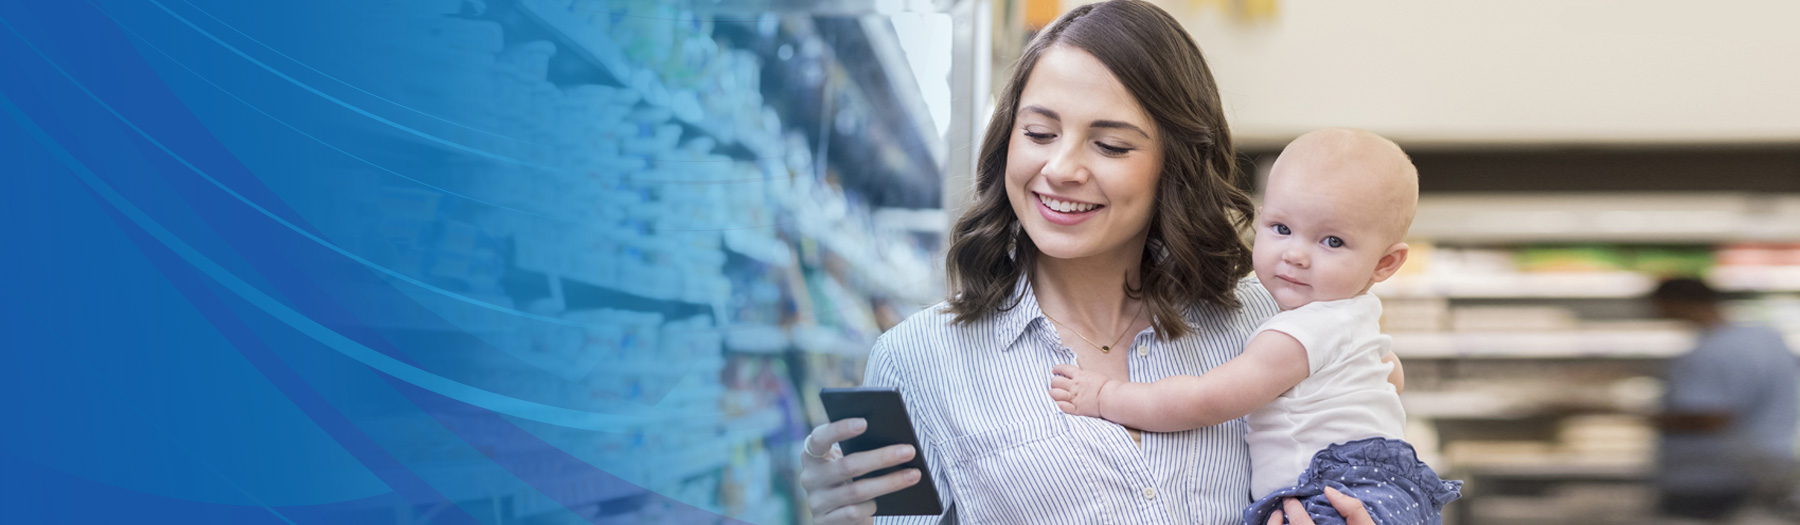 Young mother in the supermarket holding her baby, looking at a smartphone